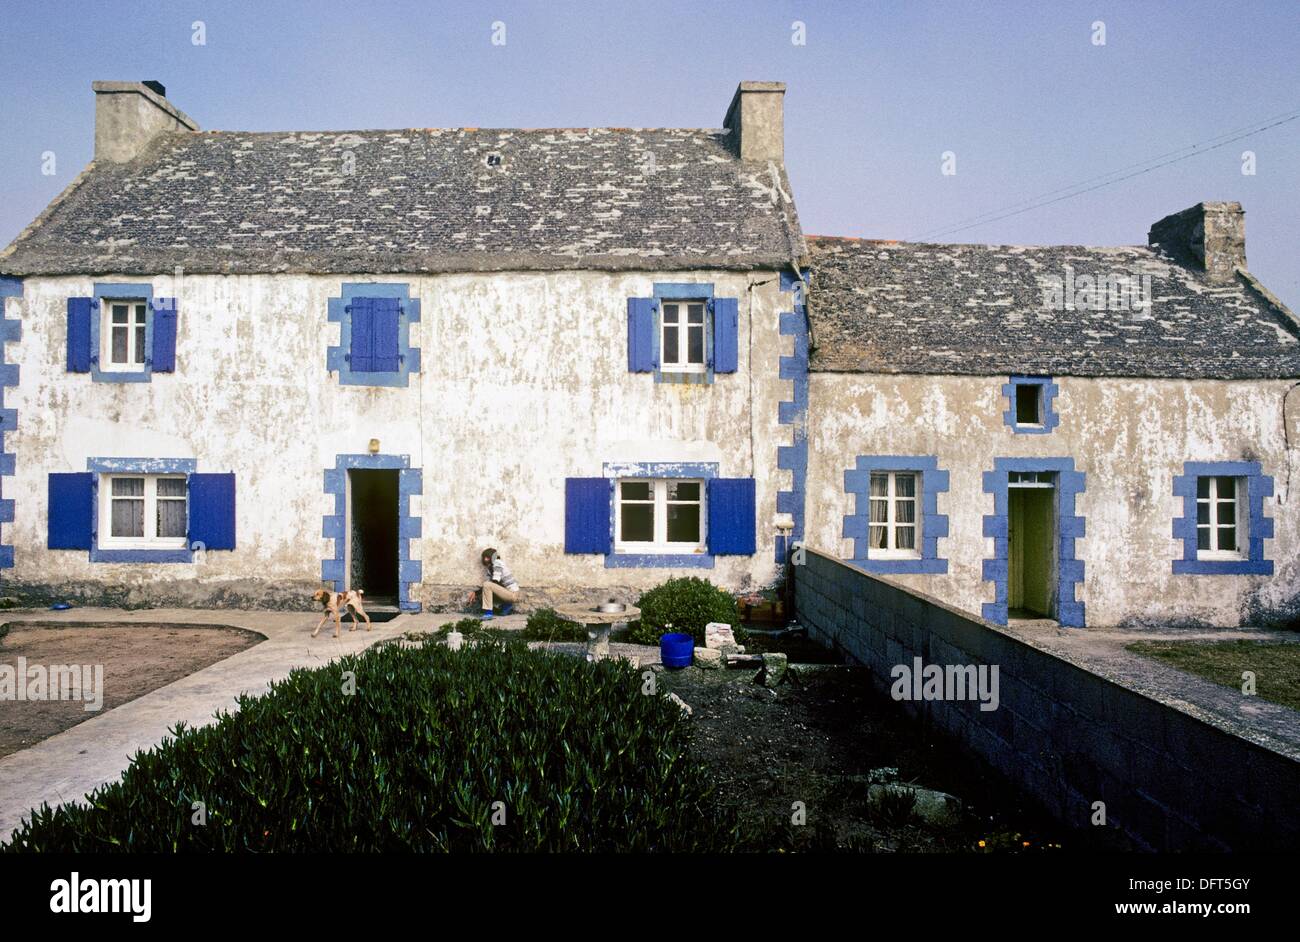 Lampaul village, Island of Ouessant, Finistère, Brittany, Atlantic Coast, France Stock Photo